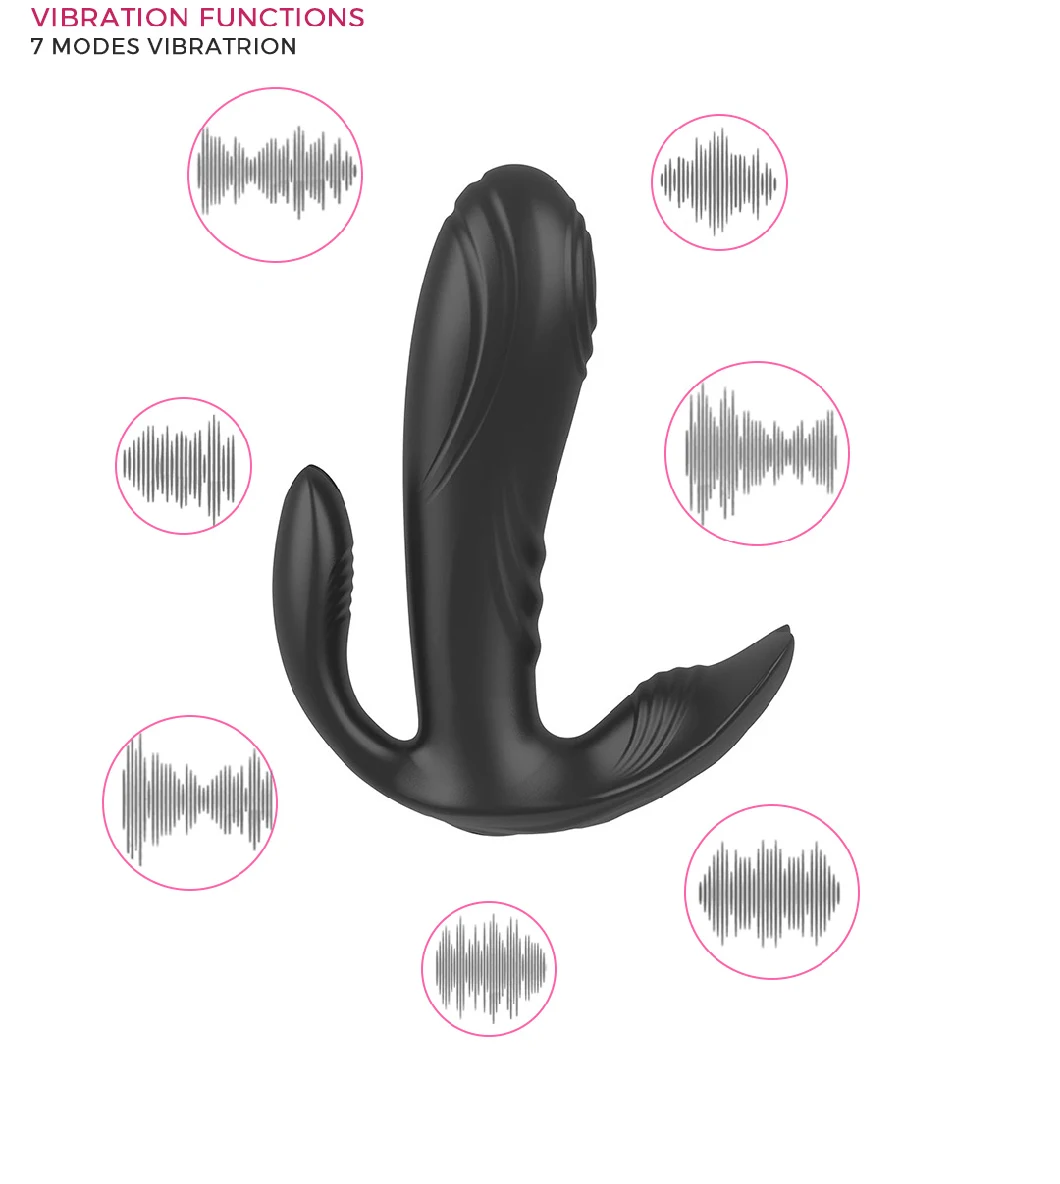 Super Power Sex Toys Butterfly Wearable Vibrator Rechargeable Bullet Vibrator Vibrating Adult Sex Products